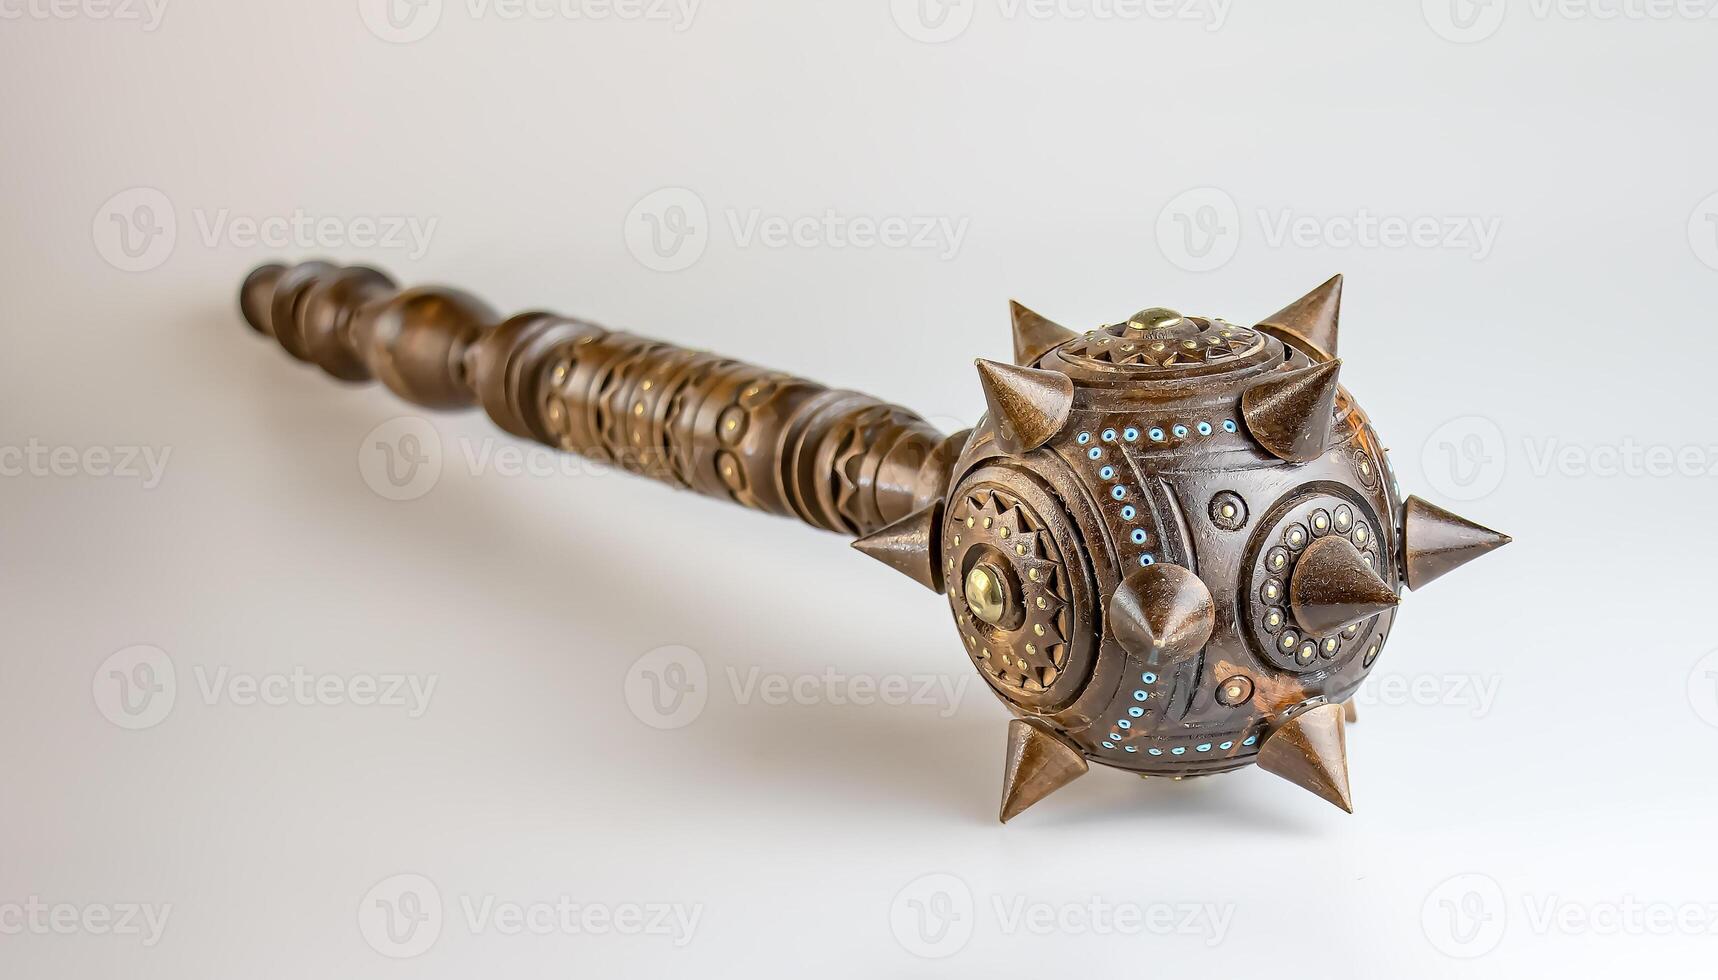 Souvenir wooden Hetman's Mace on a stand on a white background. Ukraine. photo